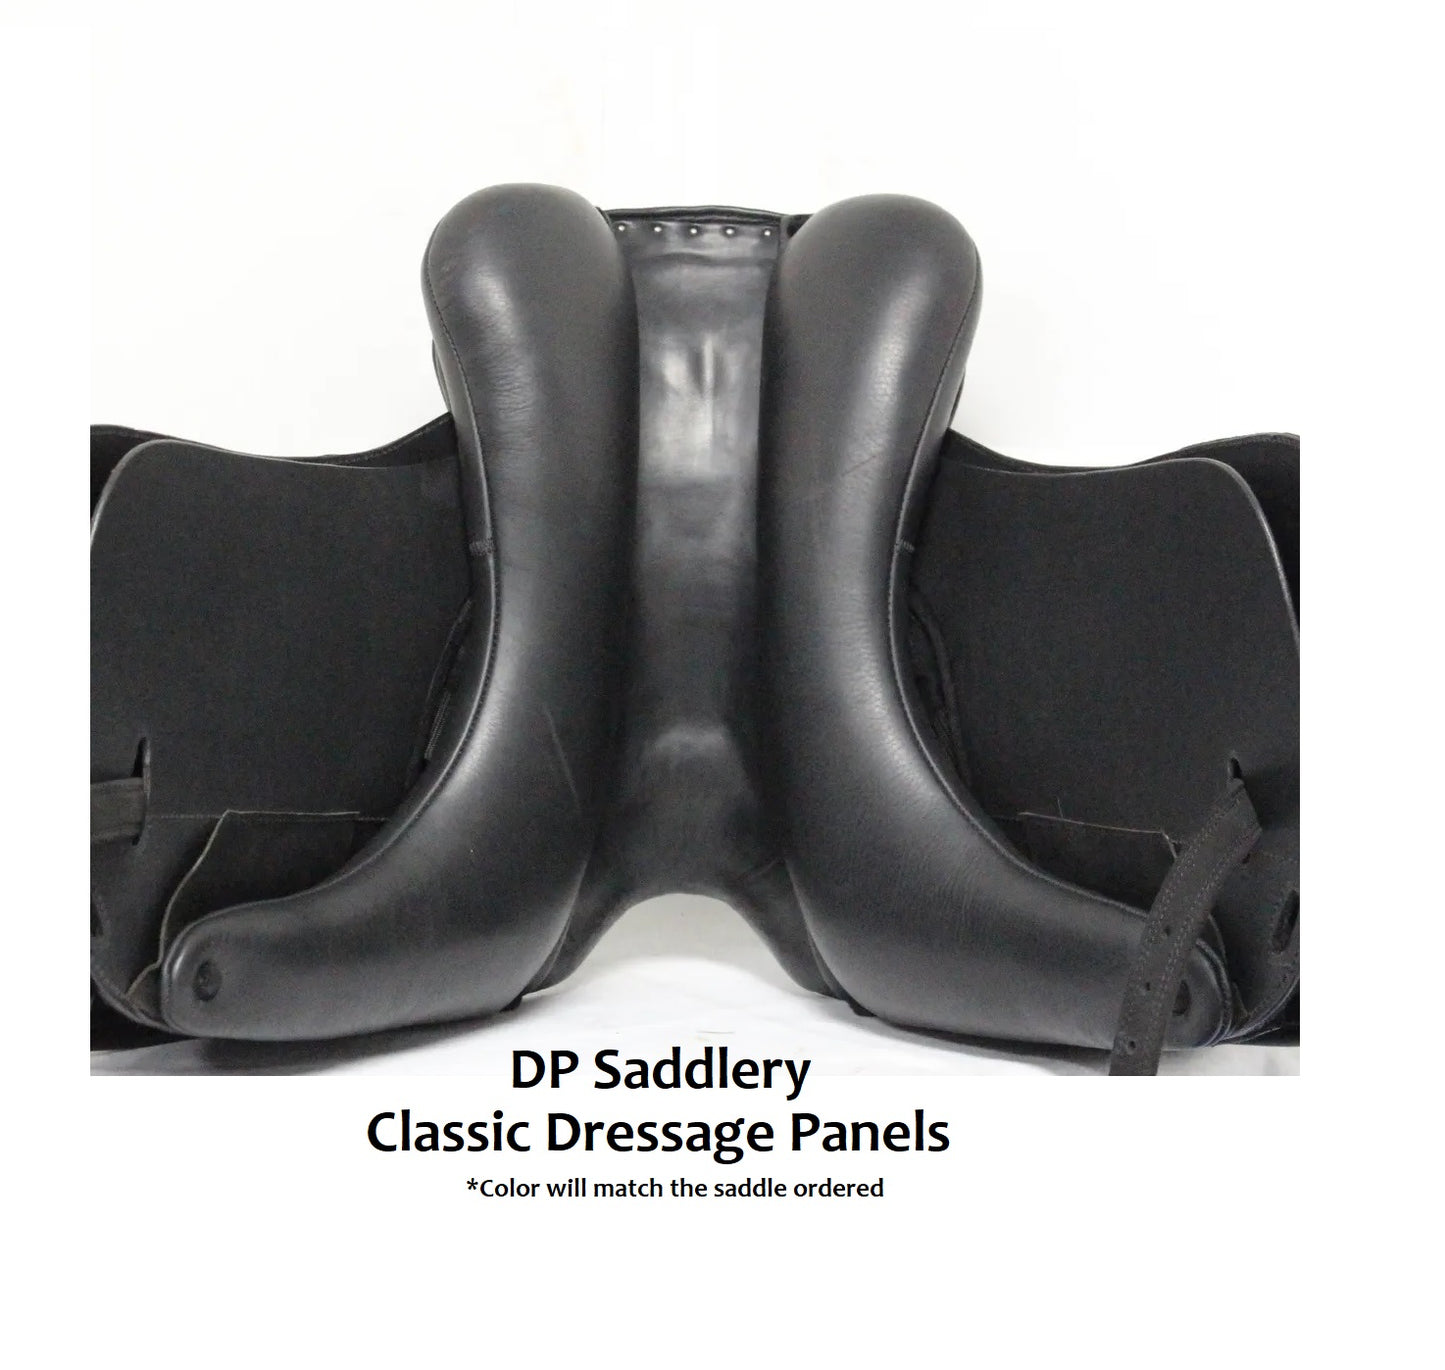 DP Saddlery Classic Dressage 5608 17.5 in